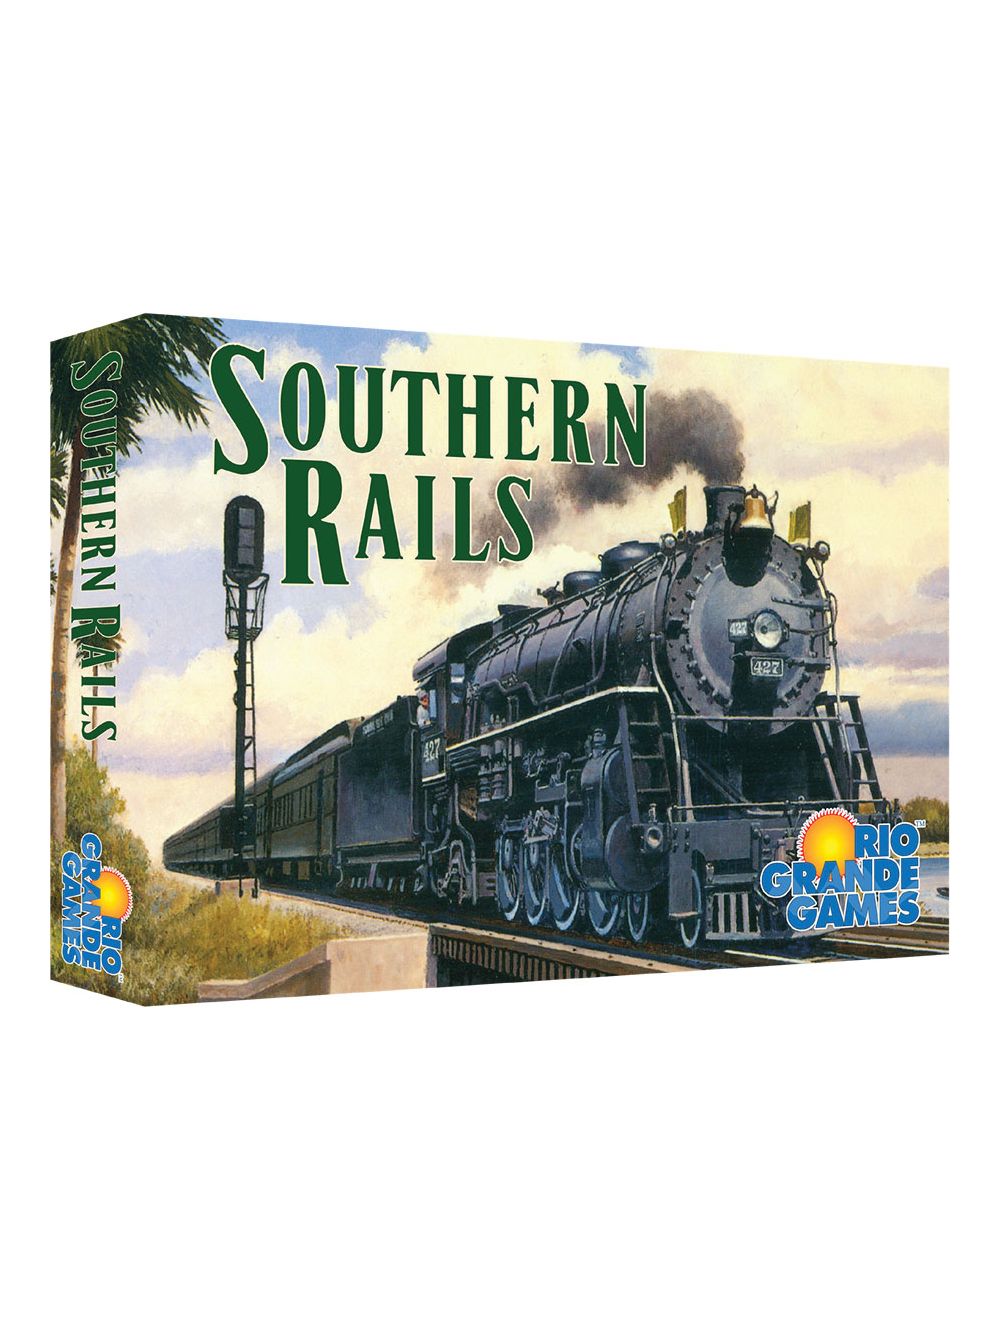 (BSG Certified USED) Southern Rails